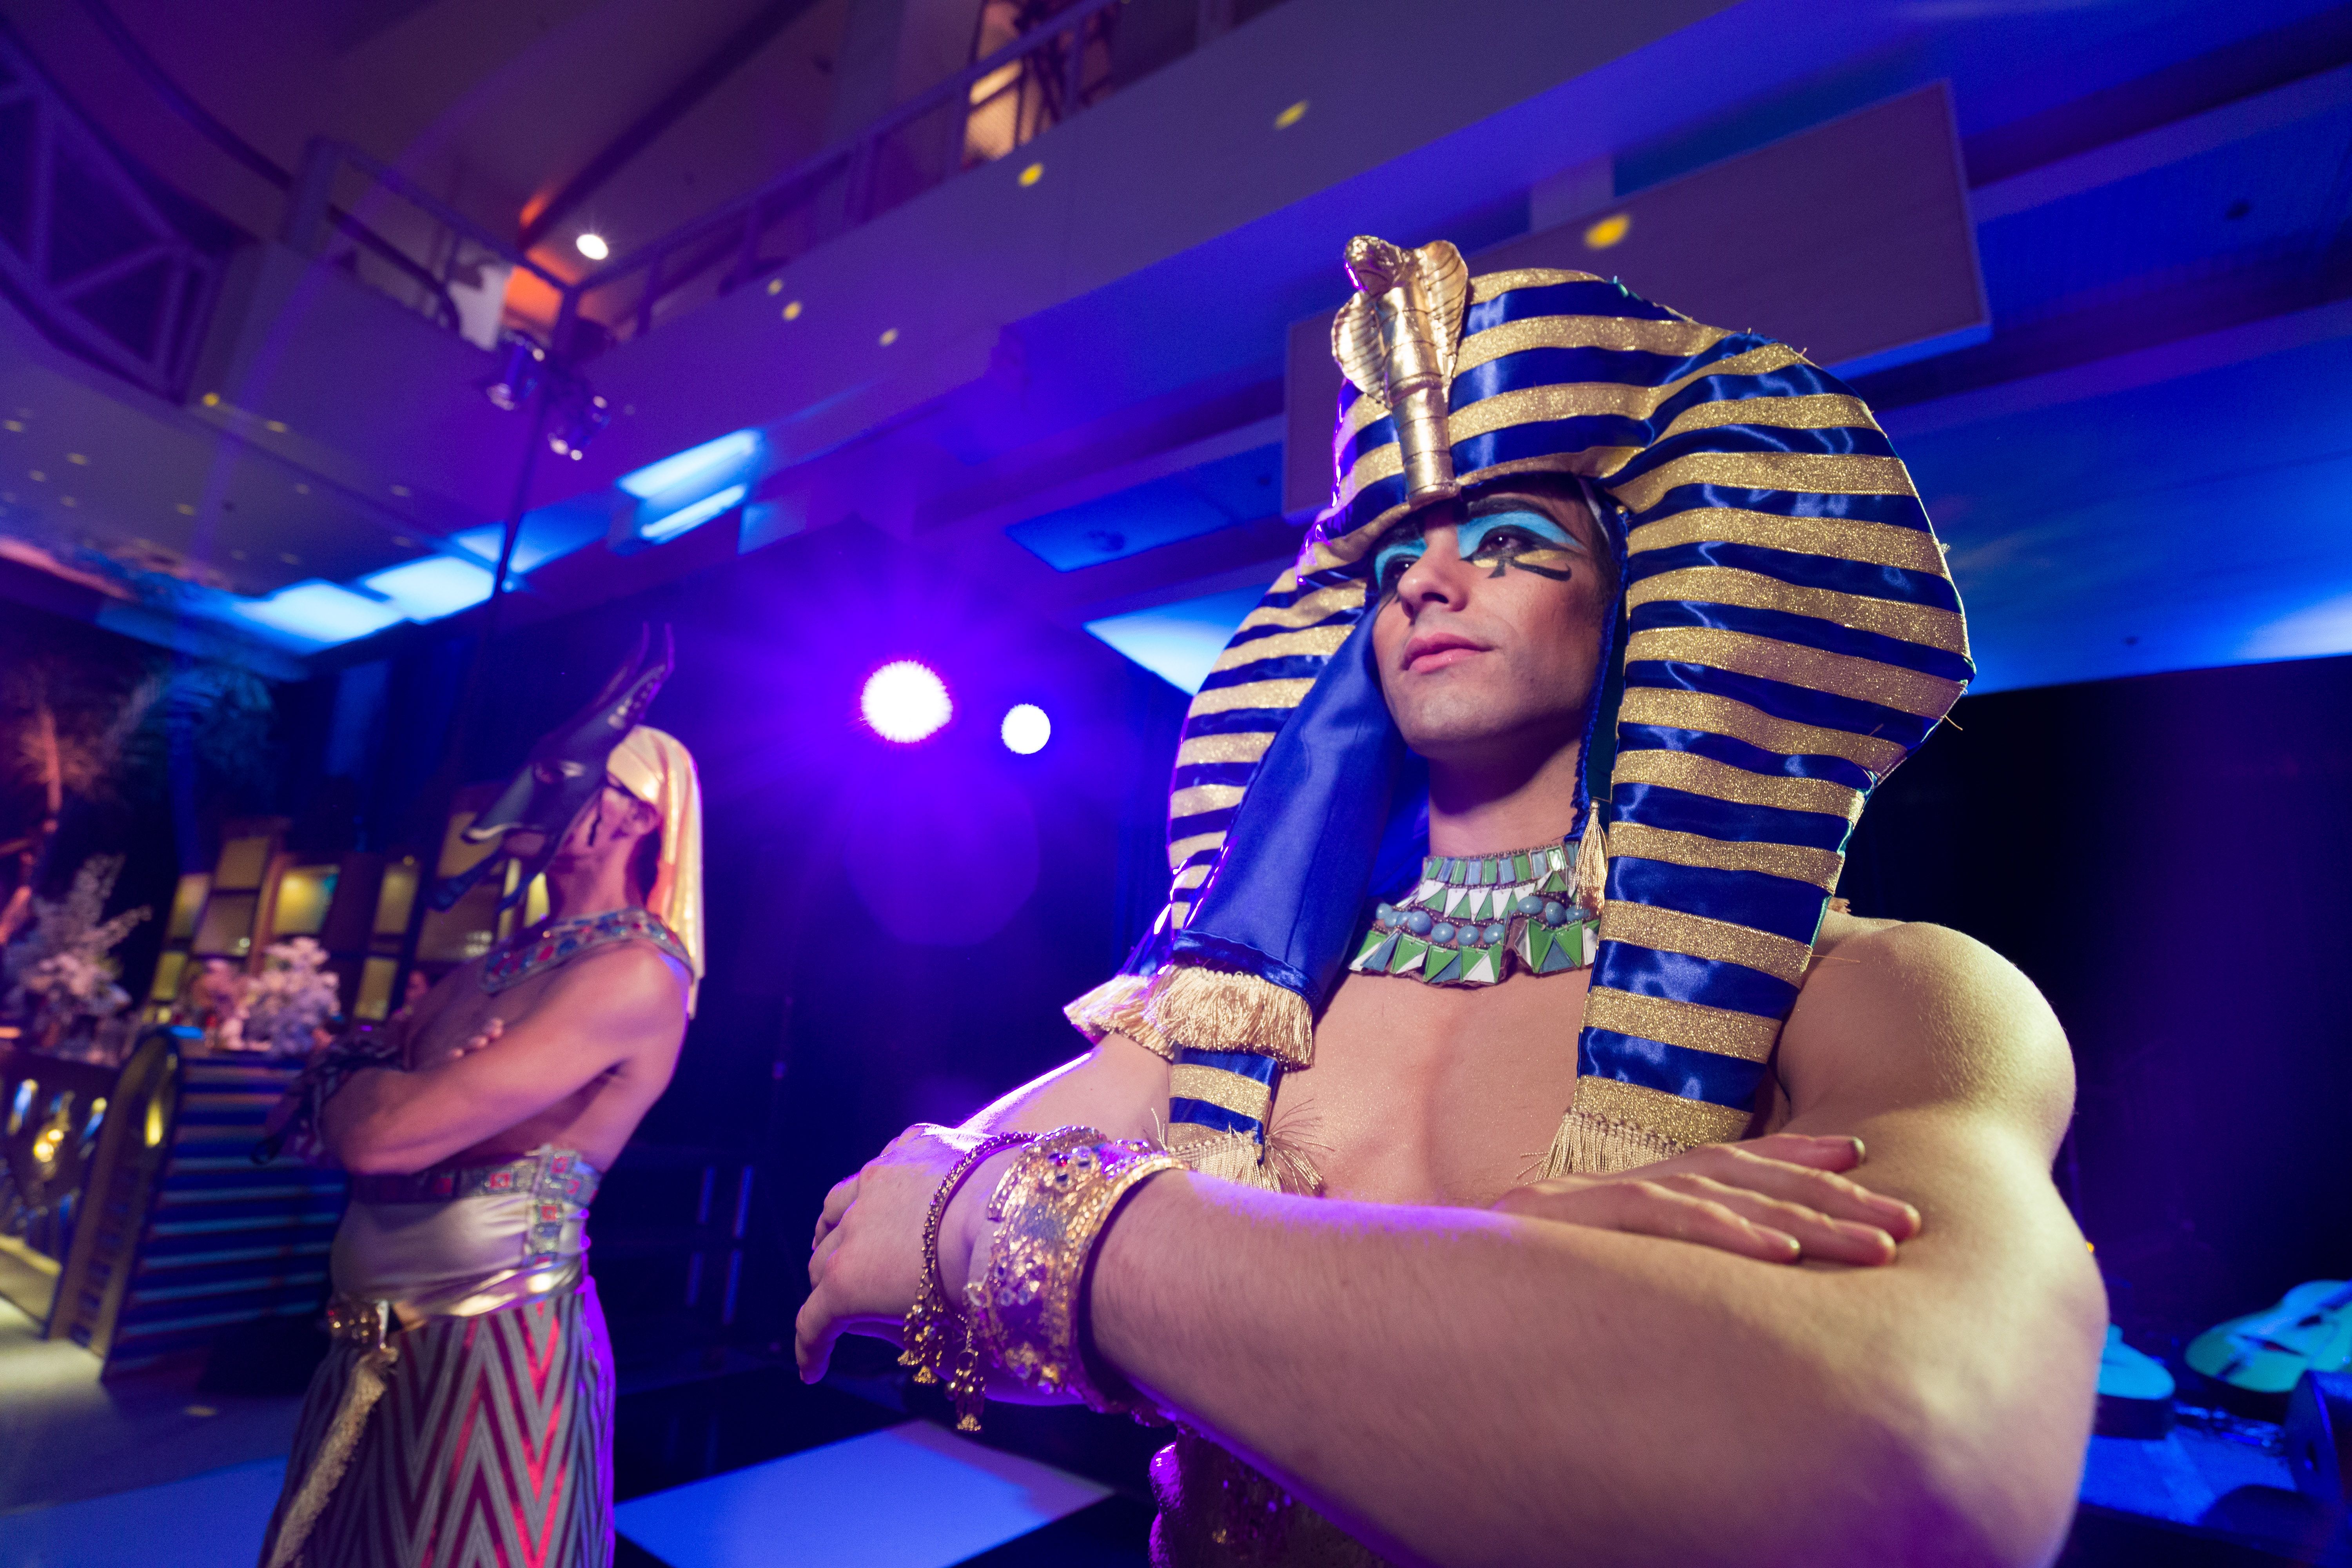 Two male costumed entertainers stand cross armed overlooking Discovery Ball after party. Shirtless entertainers are lit in blue and wearing Egyptian inspired headwear and clothing.